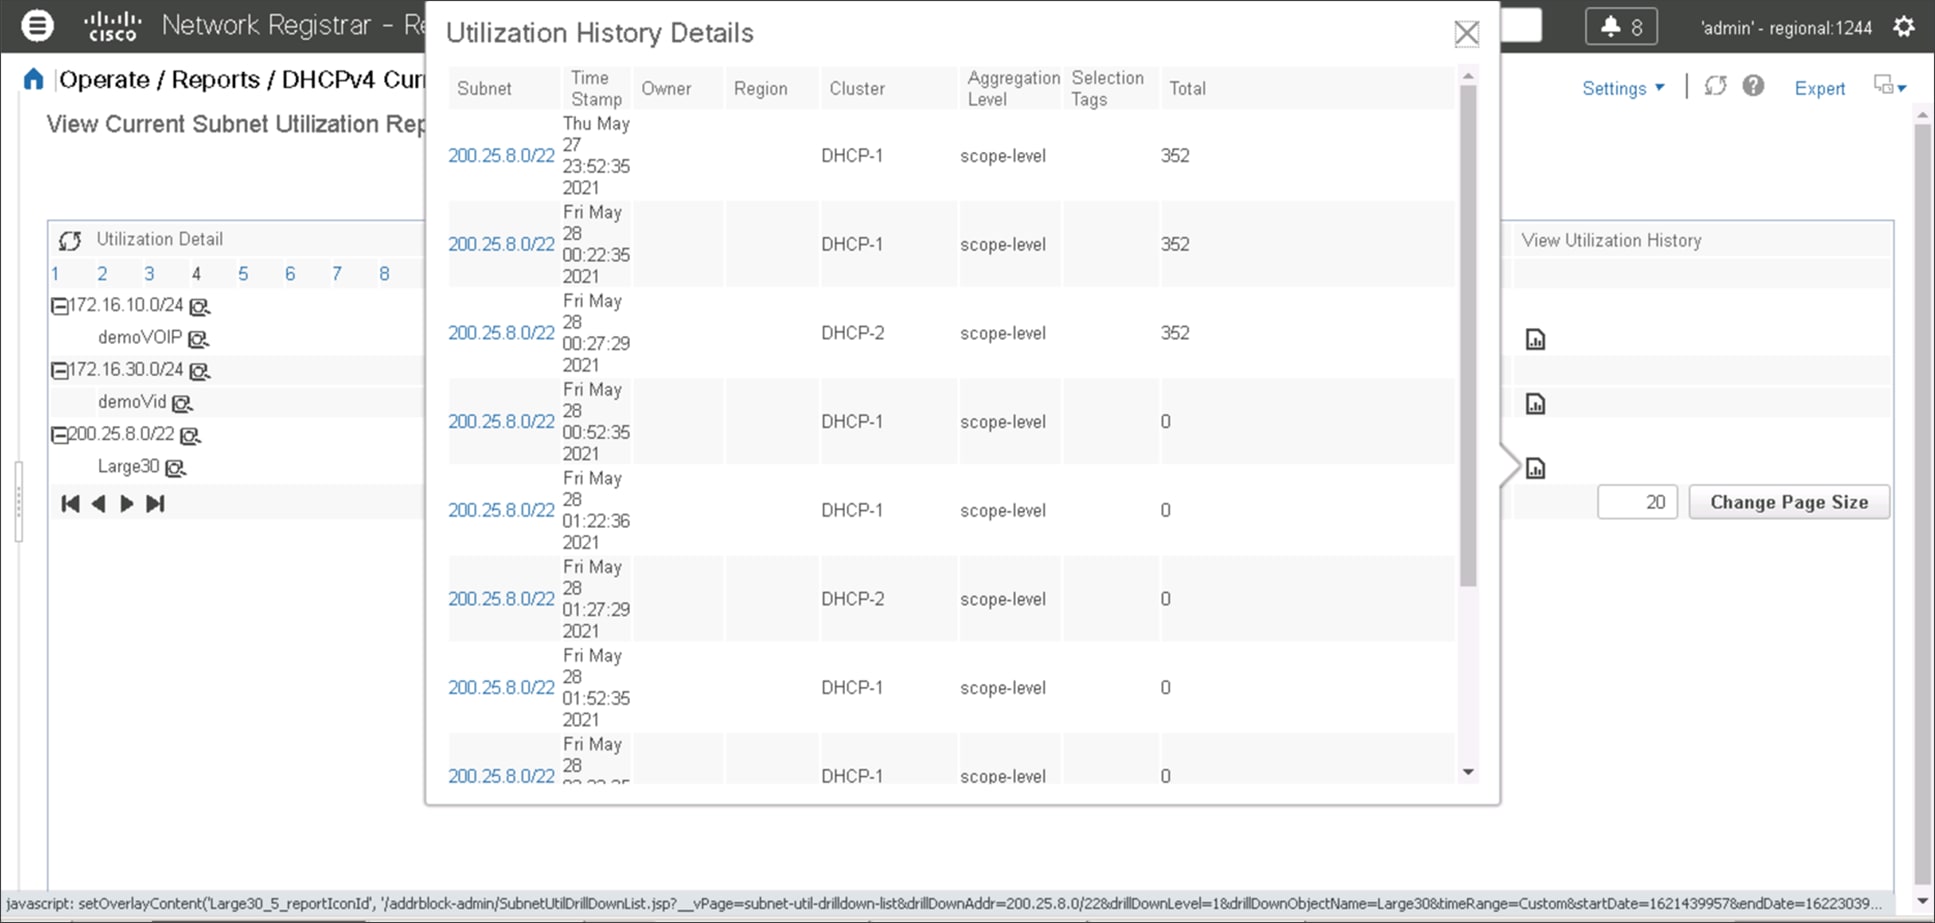 Detailed view of utilization history